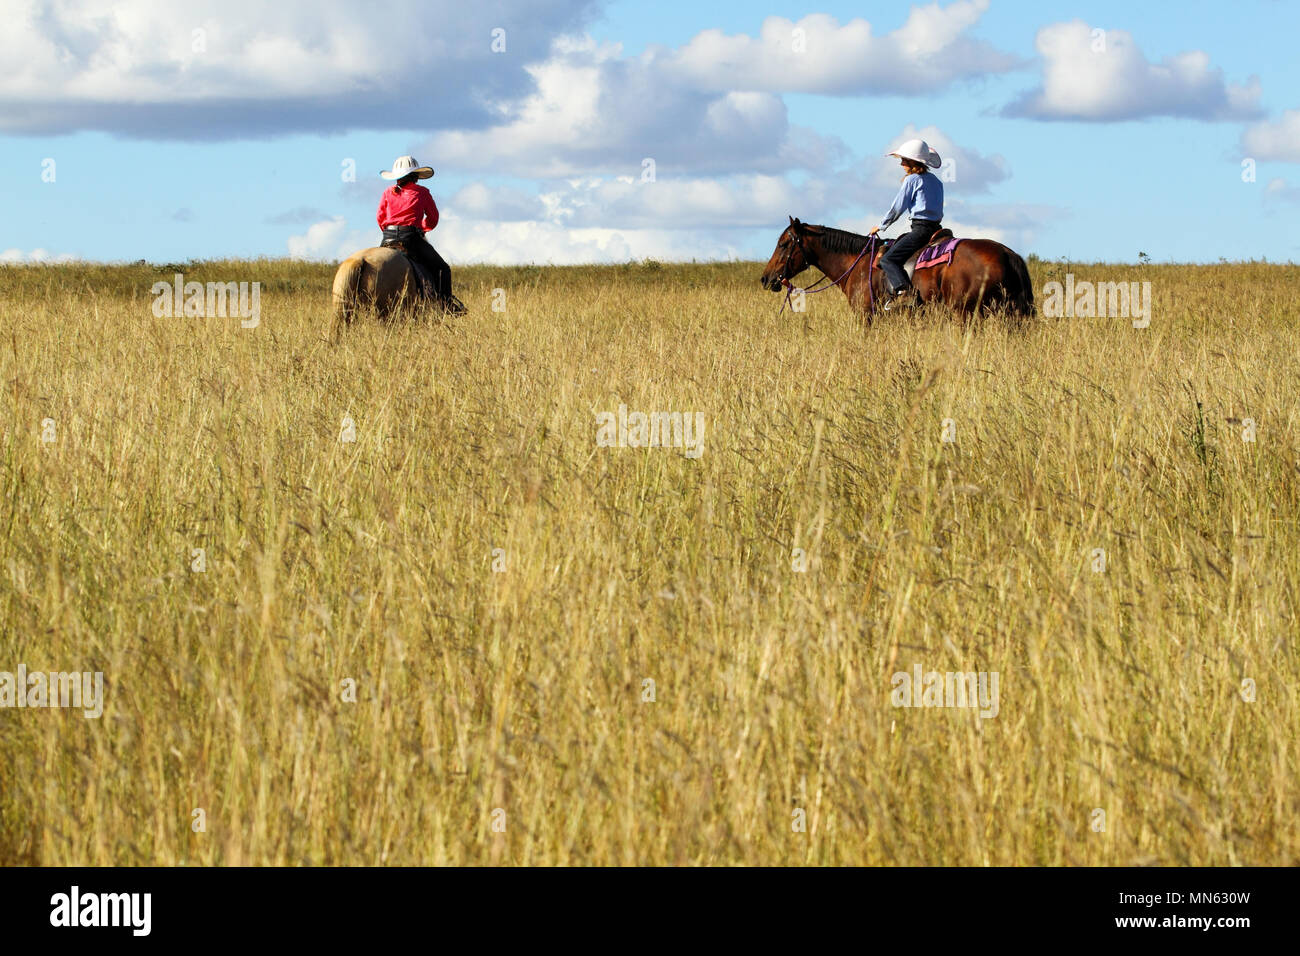 Two pre-teen girls riding horses in tall grass on a farm. Stock Photo